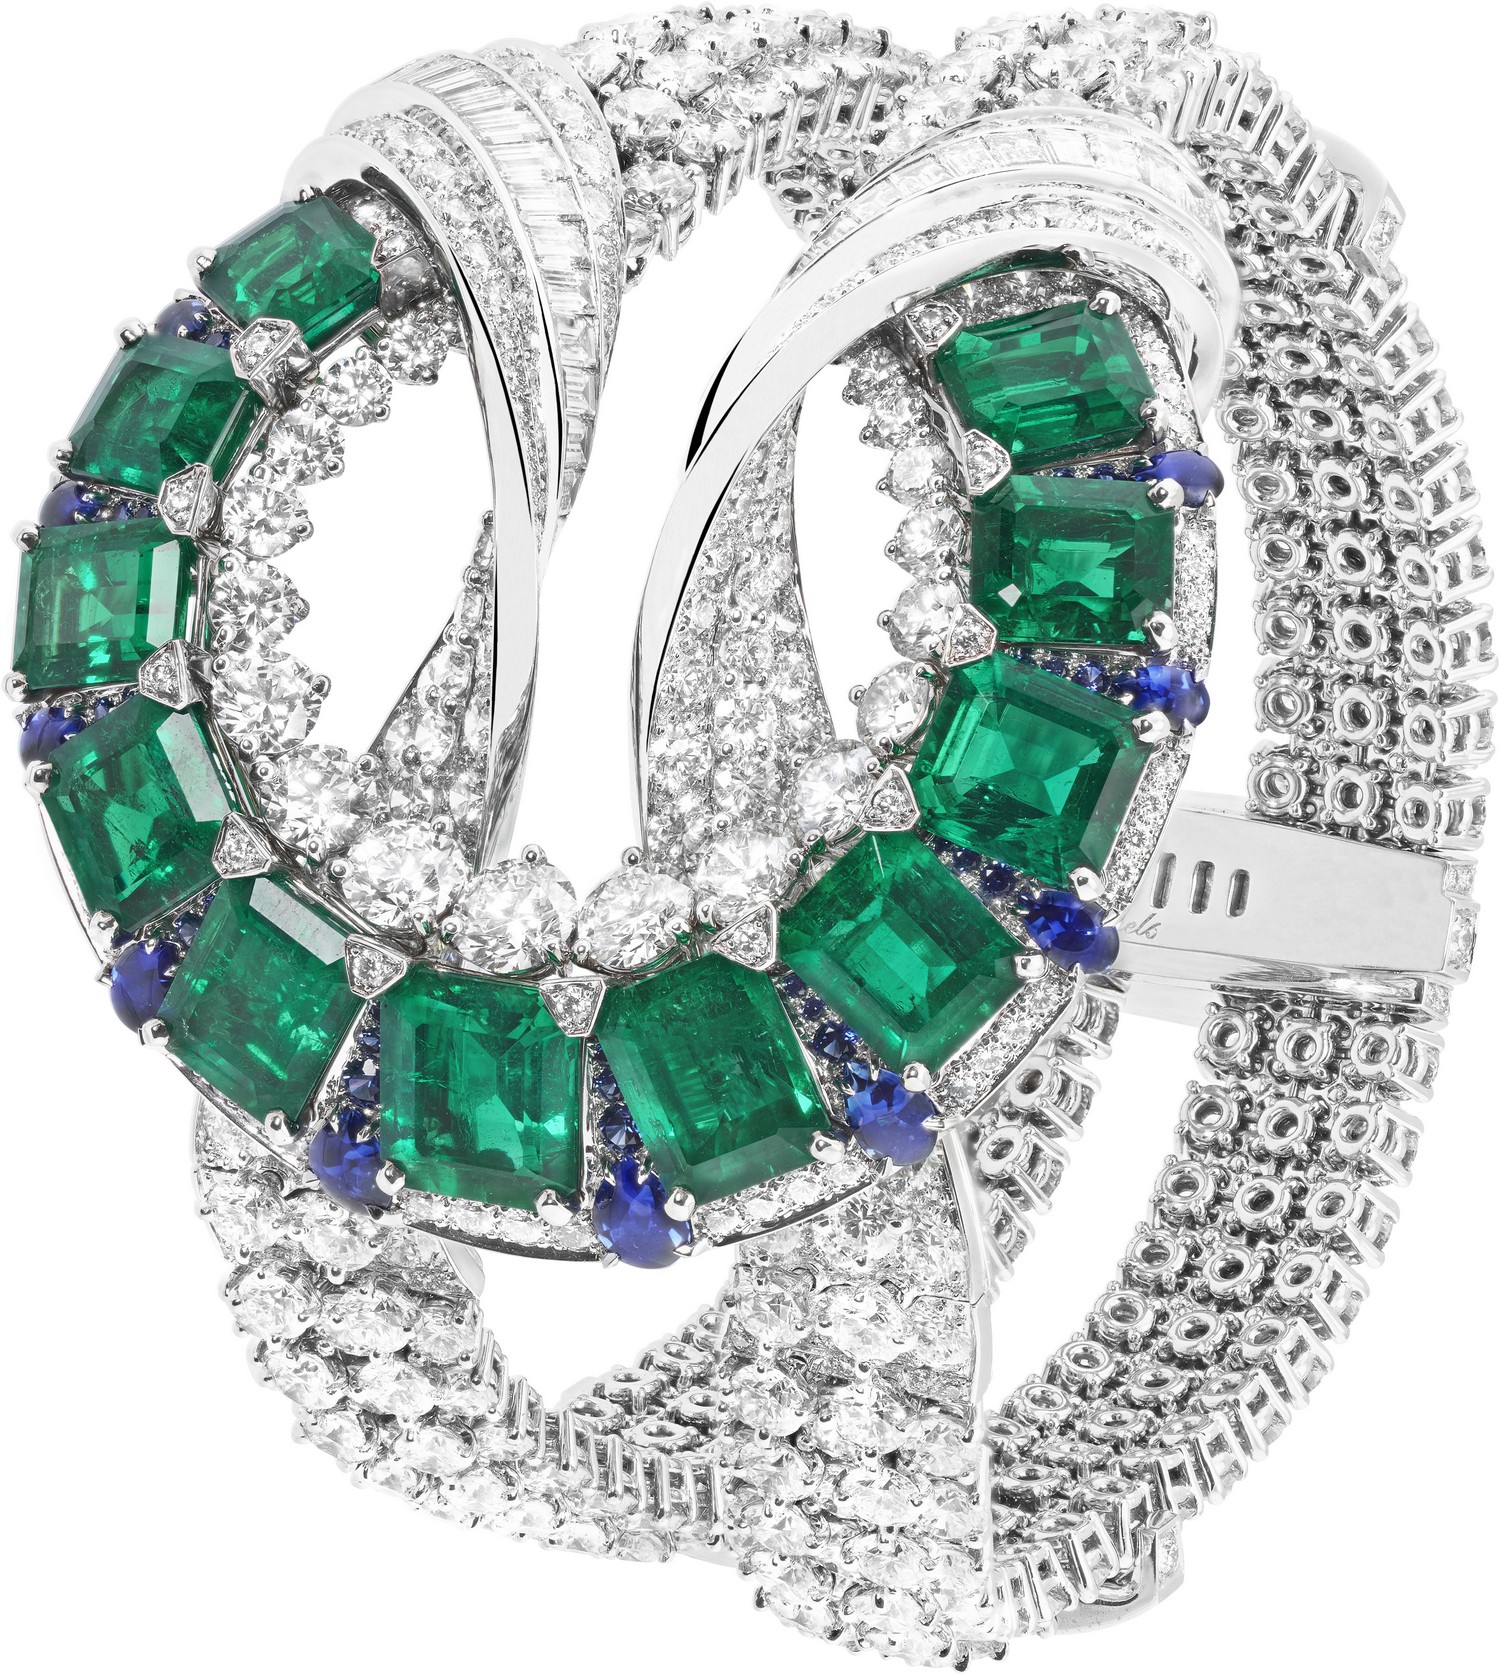 White gold, round and baguette-cut diamonds, round and buff-topped pear-shaped sapphires, 11 octagonal-cut emeralds for a total of 19.38 carats (Colombia).